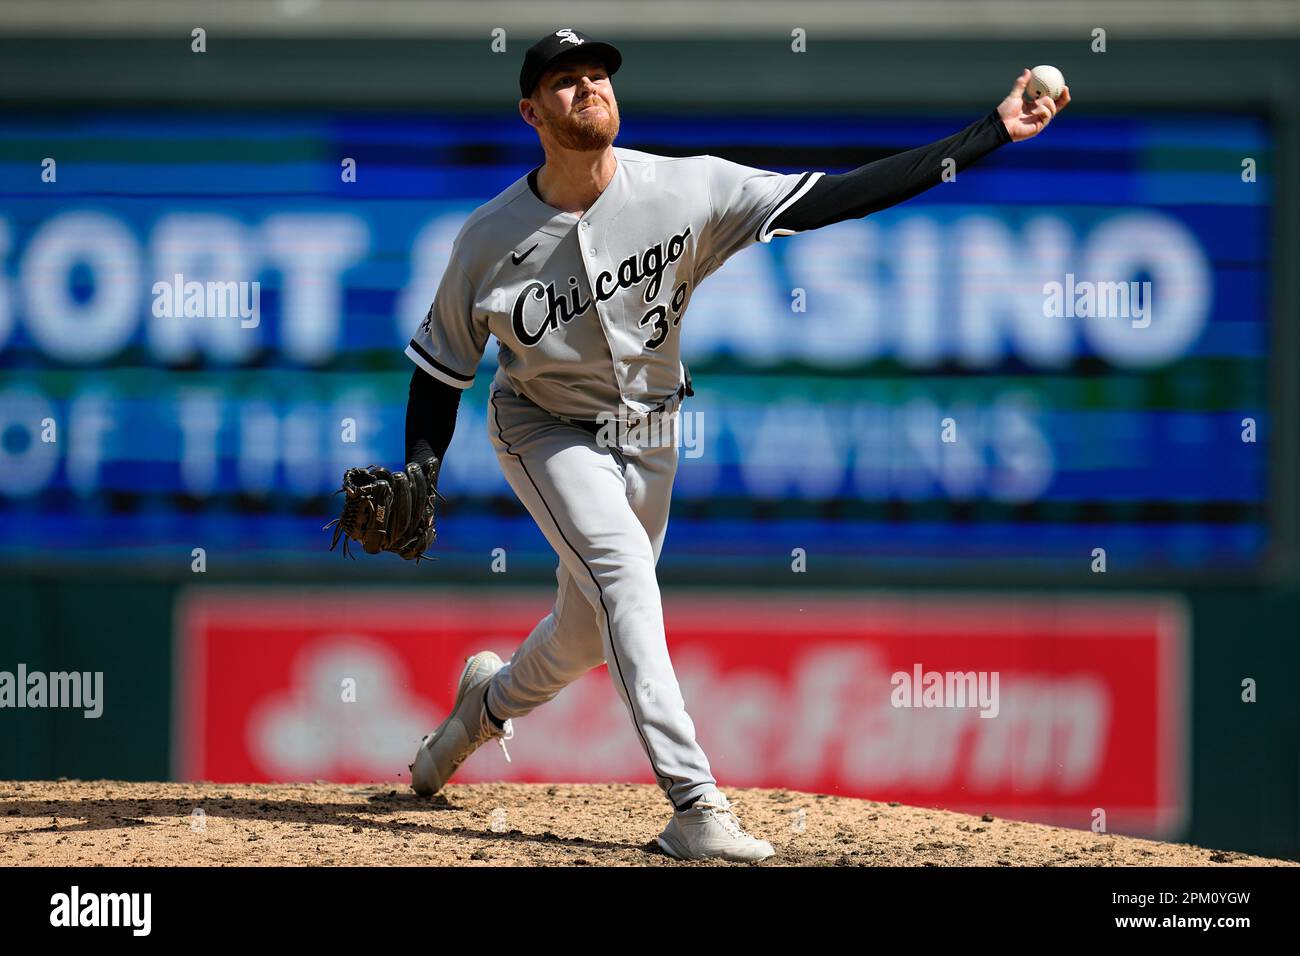 Chicago White Sox relief pitcher Aaron Bummer delivers during the